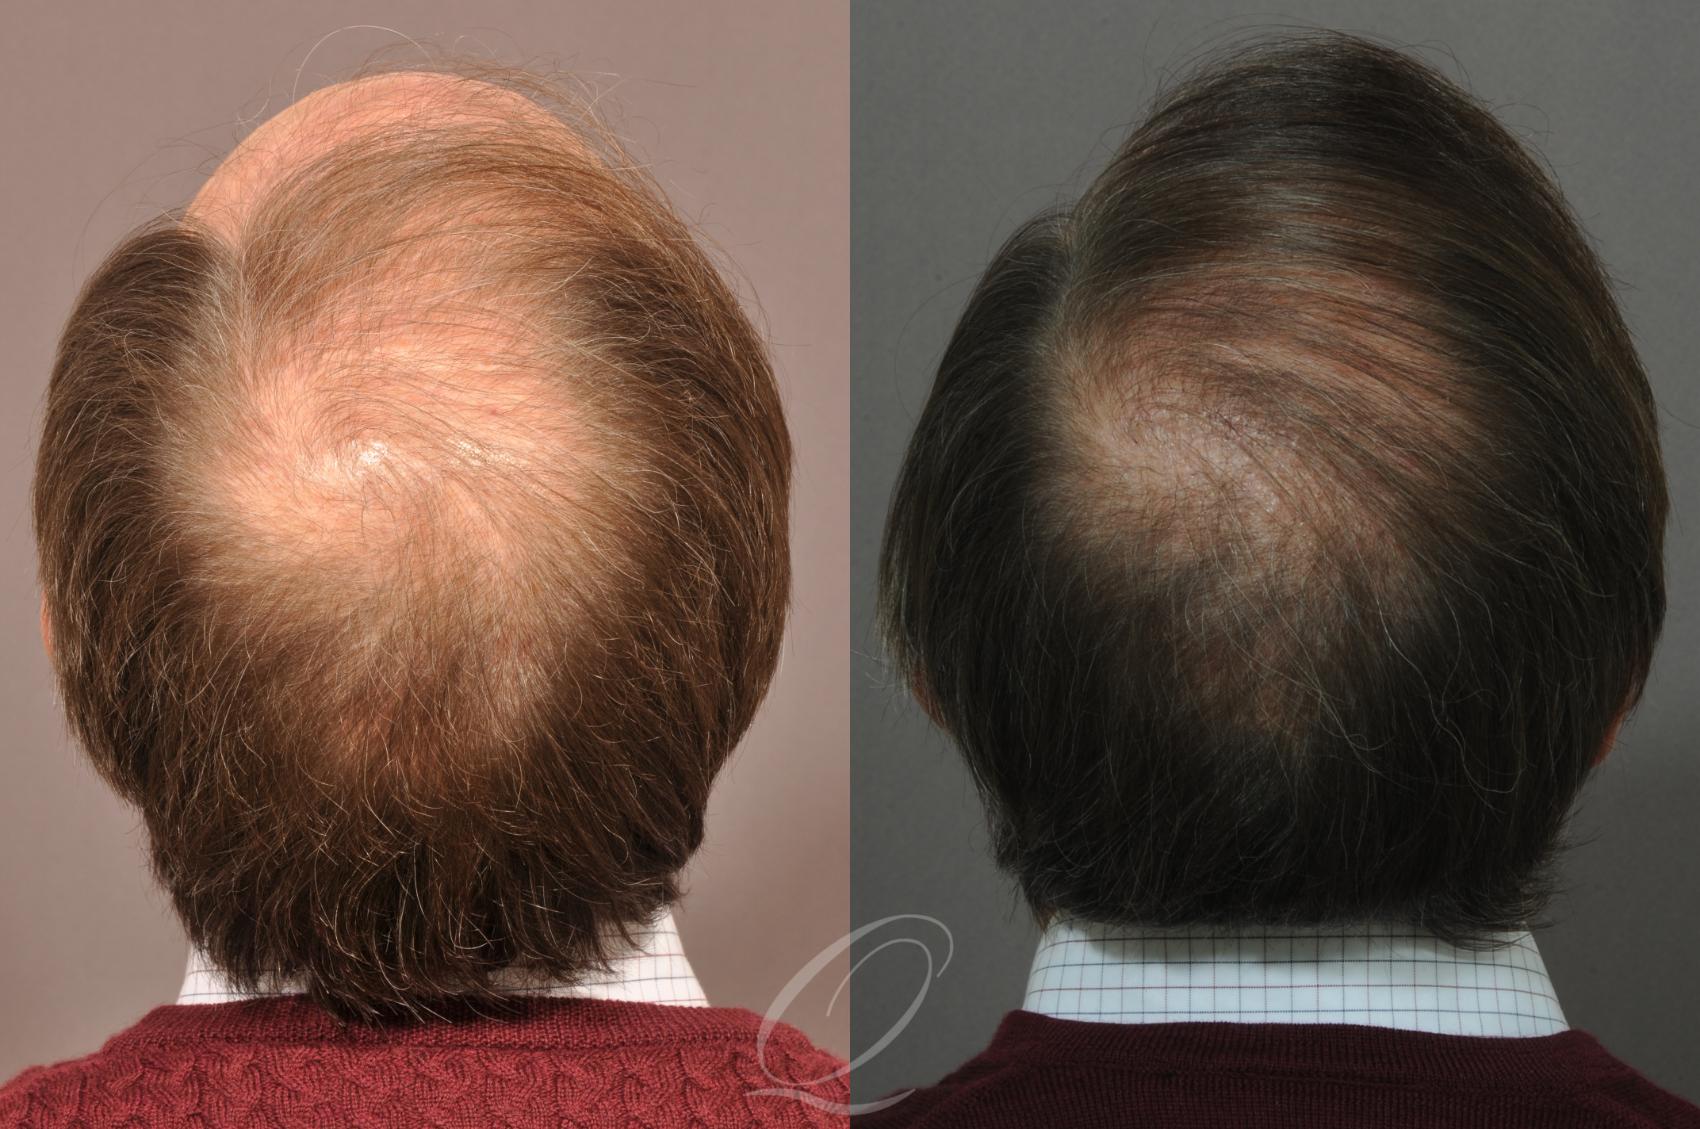 FUT Case 1021 Before & After View #6 | Rochester, Buffalo, & Syracuse, NY | Quatela Center for Hair Restoration